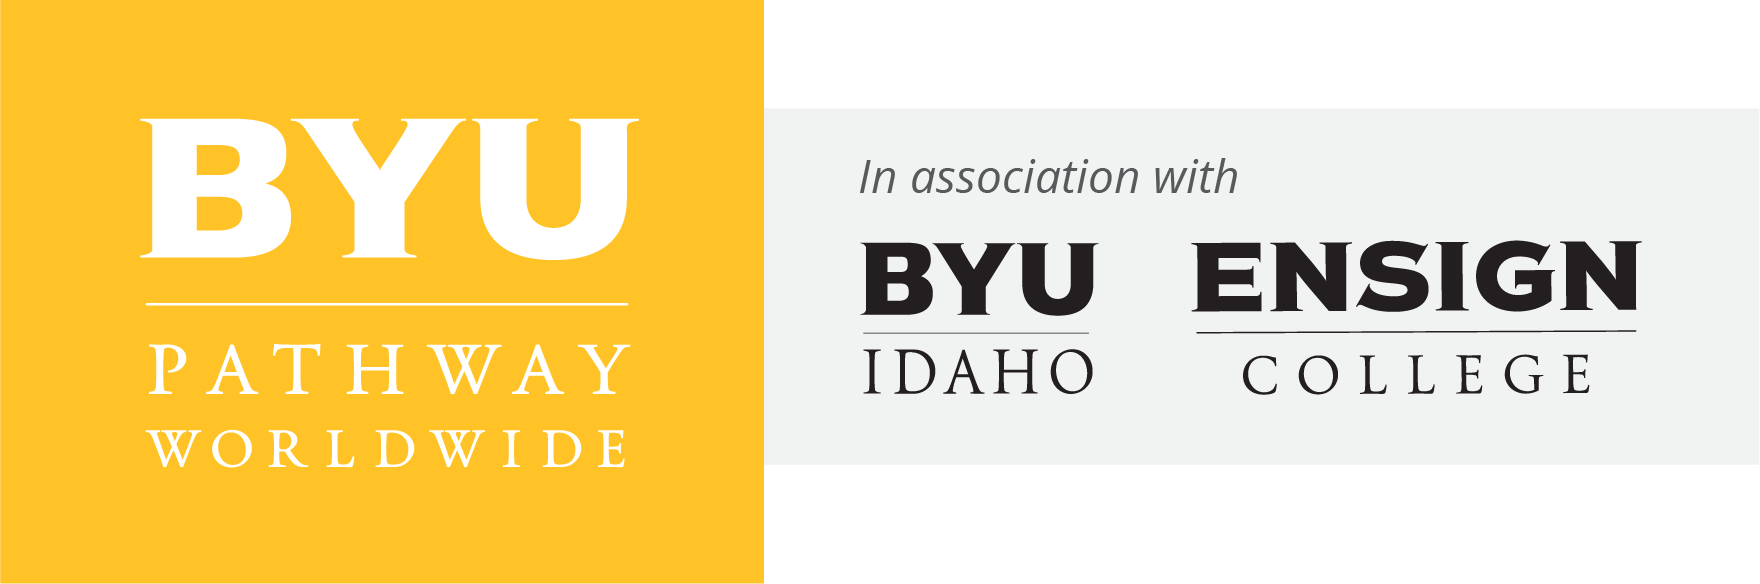 BYU-Pathway - Online Certificates and Degrees Application